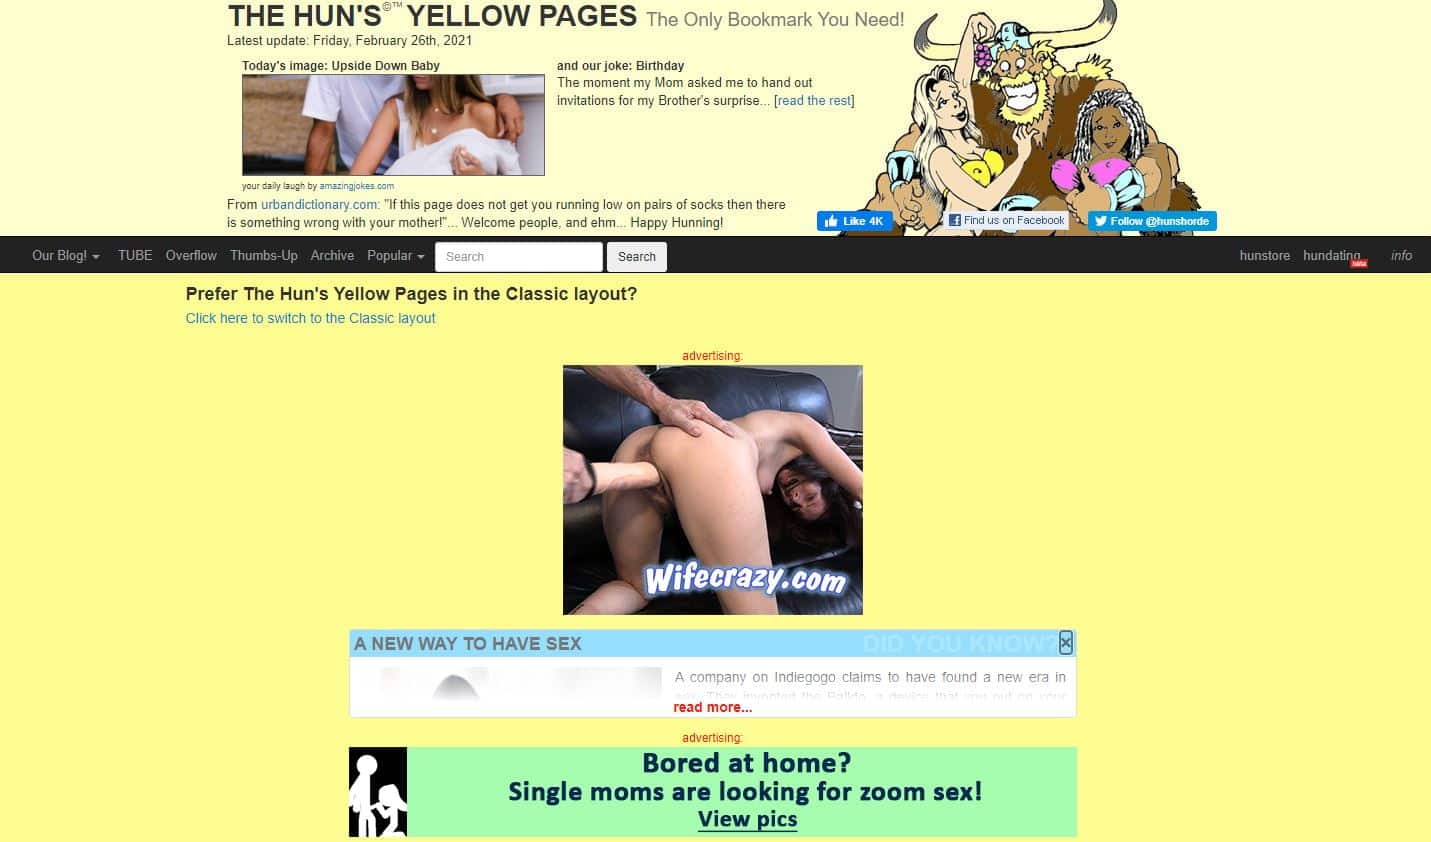 The huns yellowpages